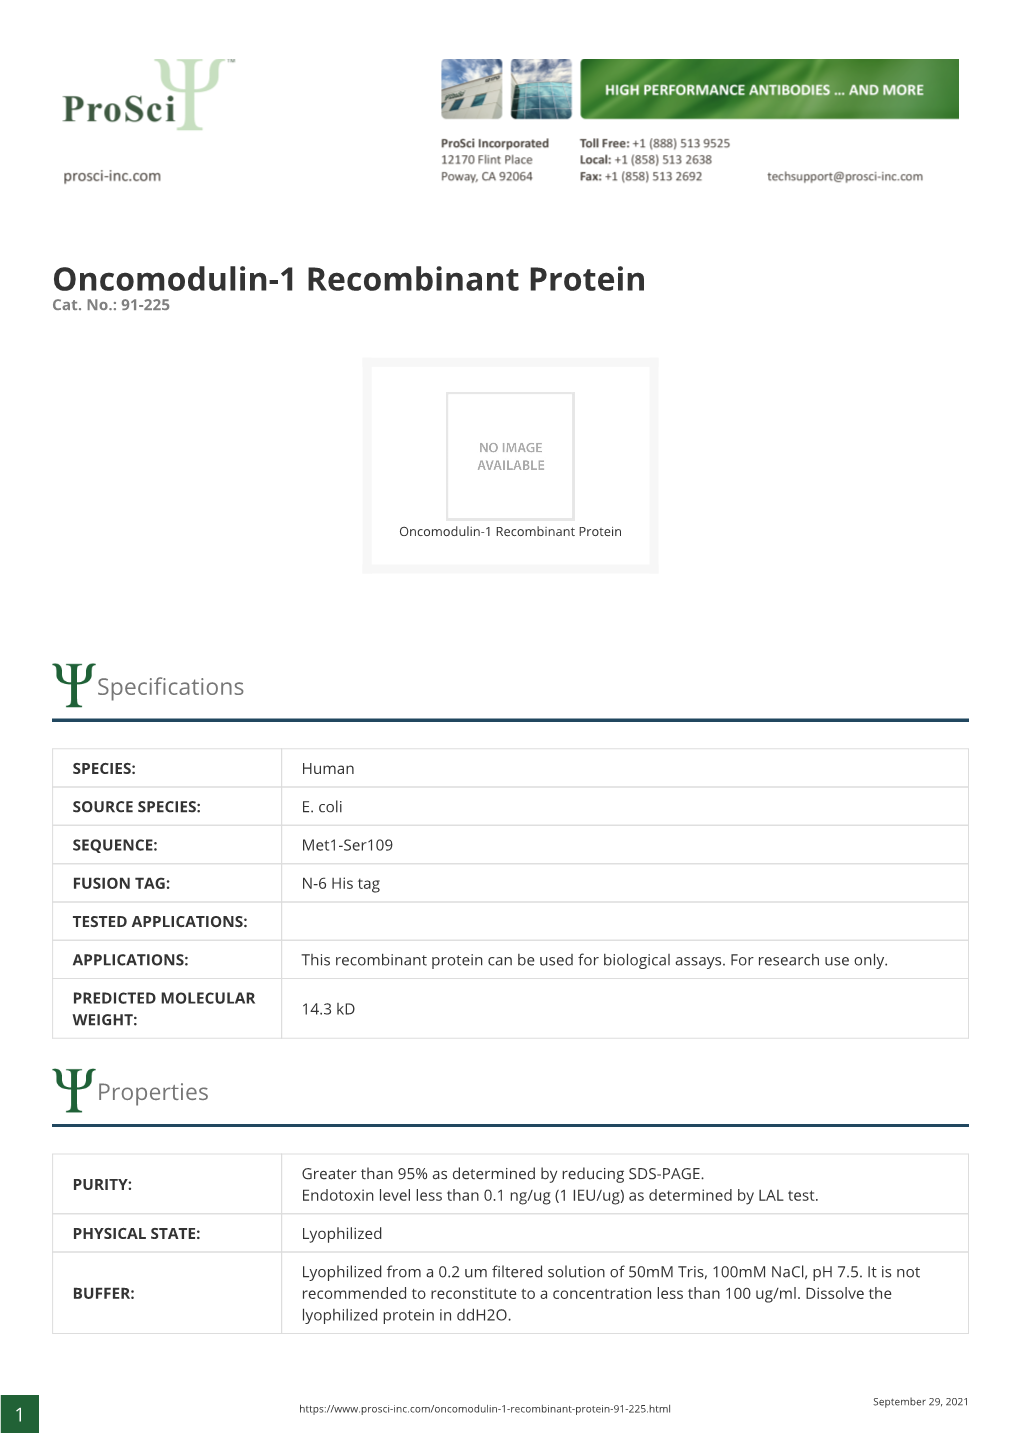 Oncomodulin-1 Recombinant Protein Cat